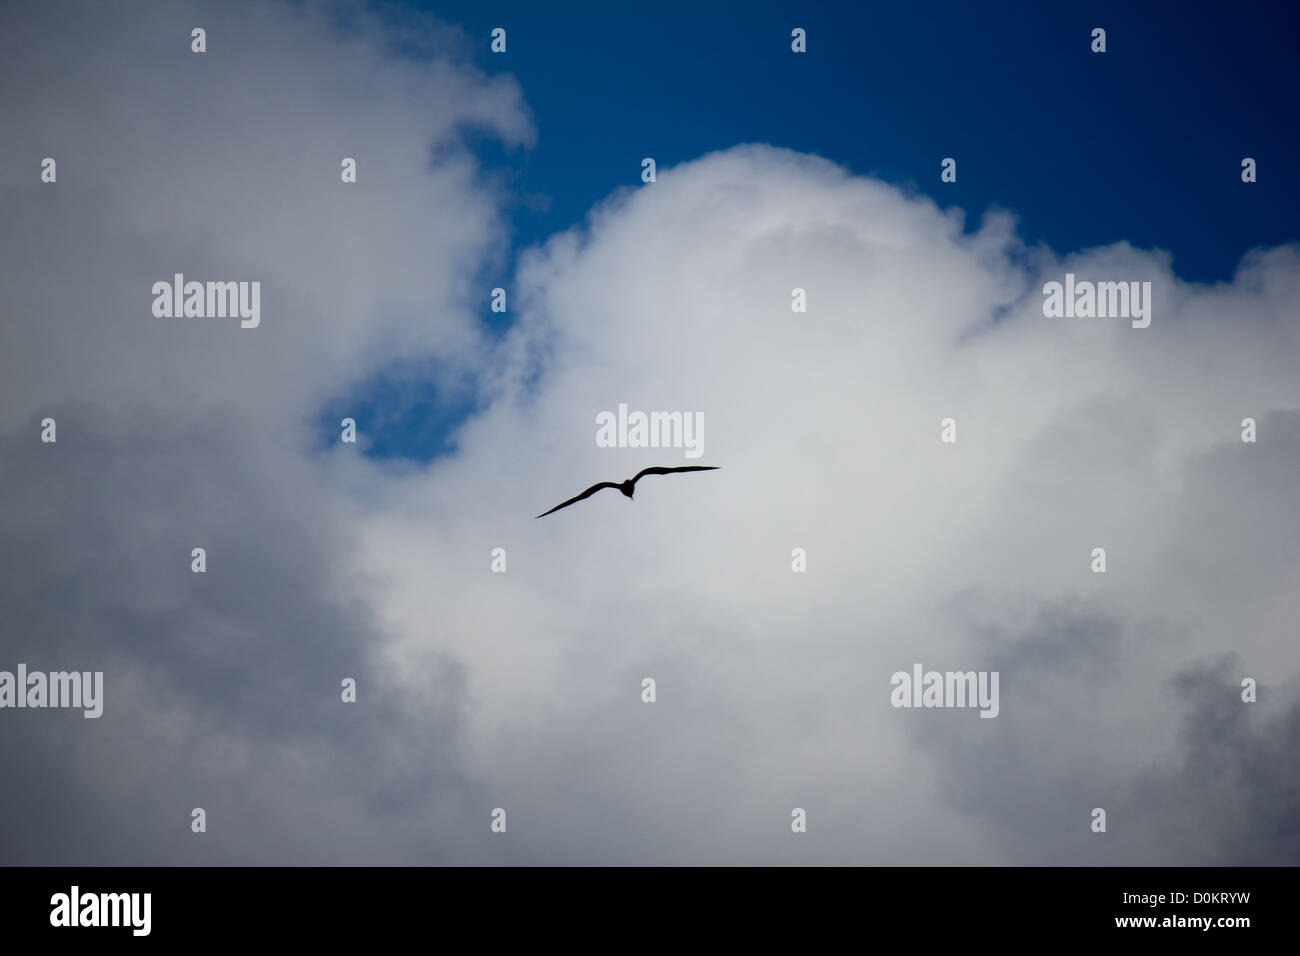 Egrets were circling the ship and soaring on the air currents. Stock Photo